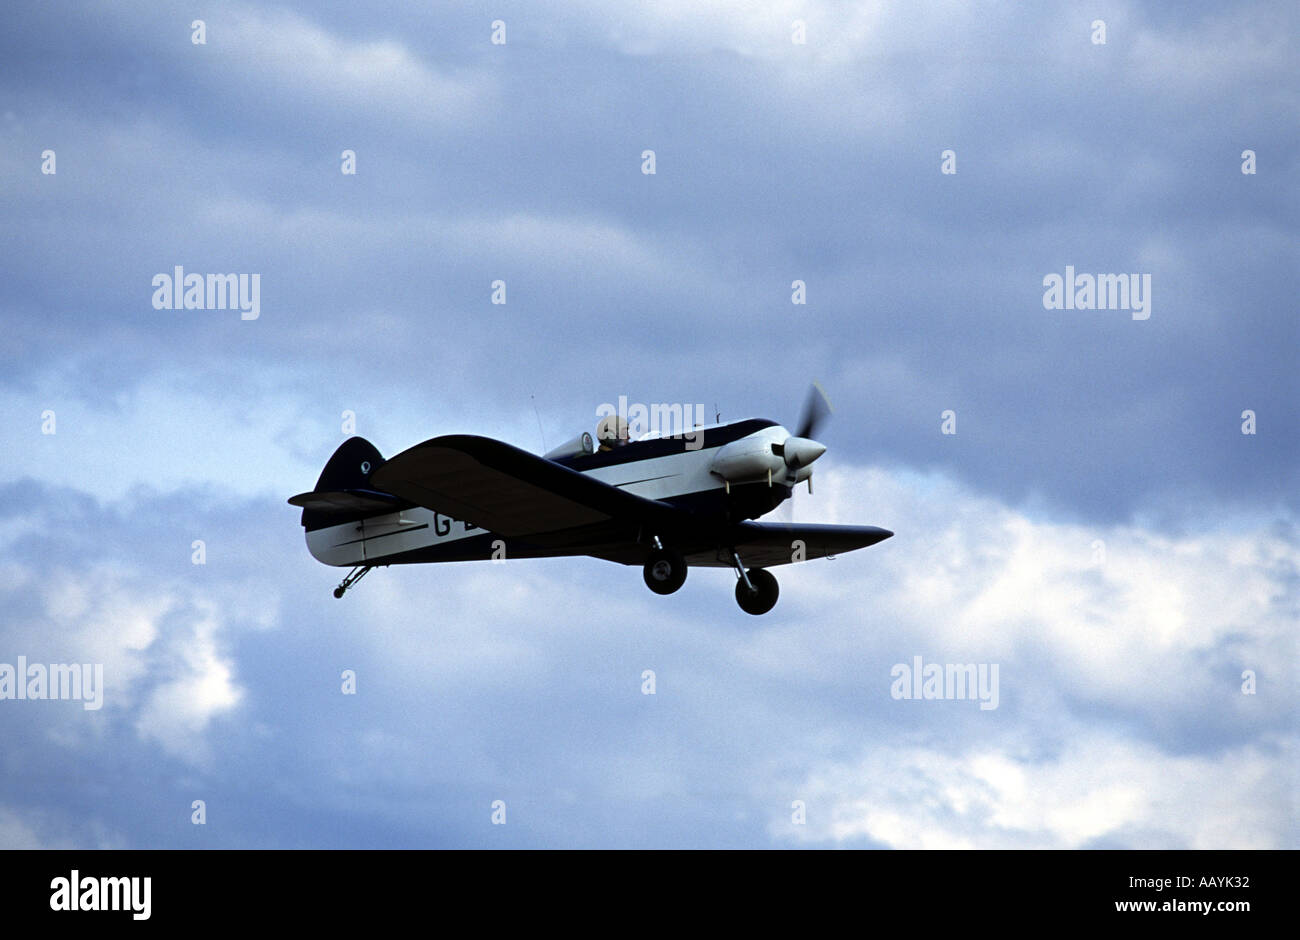 A single seat light aircraft taking off from a private airfield, Boxsted, Essex, UK. Stock Photo